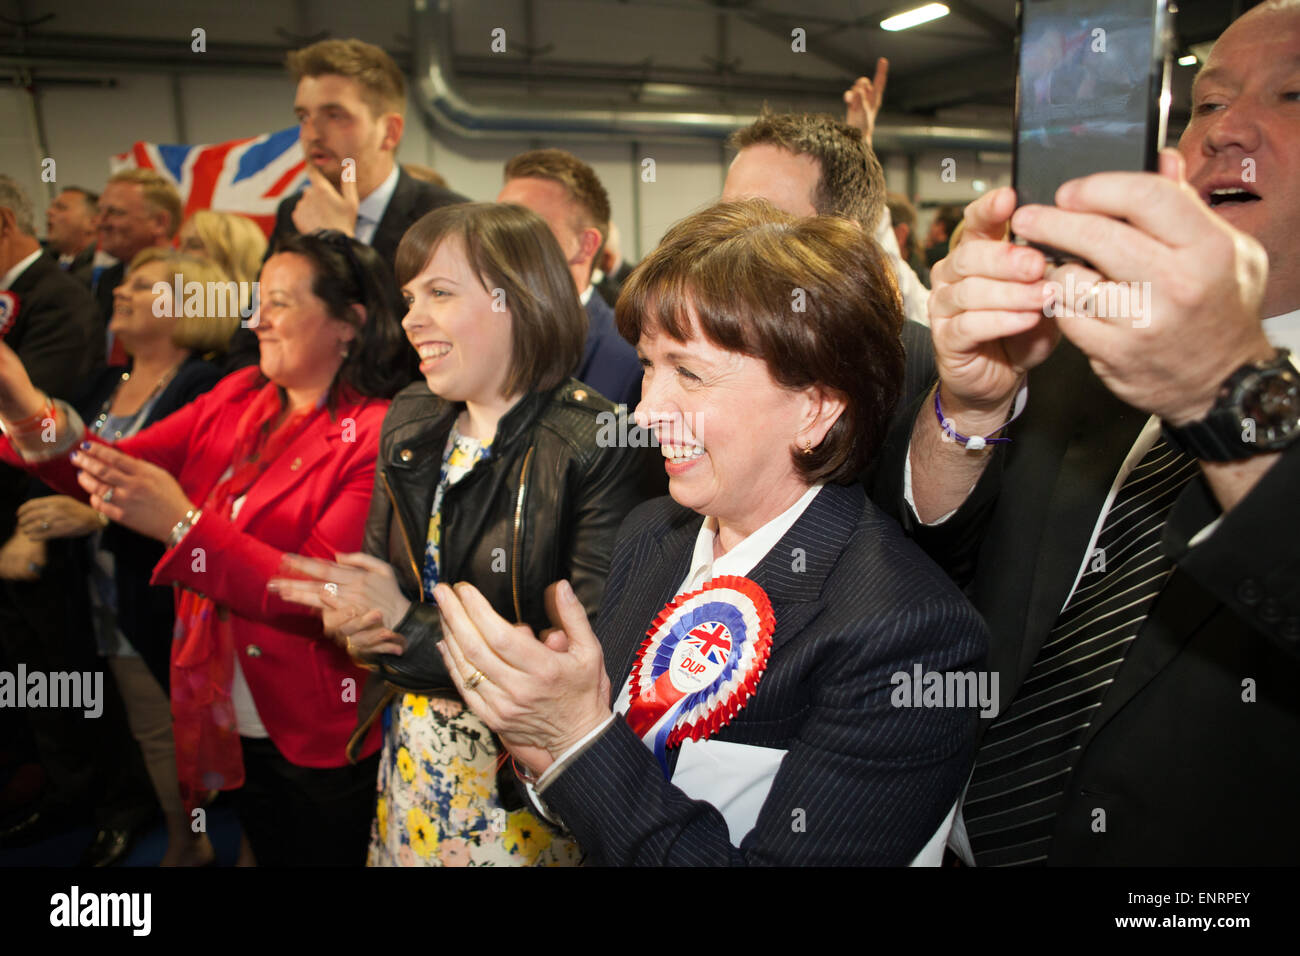 Belfast UK. 7th May 2015 General Election:  Diane Dodds with daughter celebrating after husband Nigel wins the Seat for Belfast Stock Photo